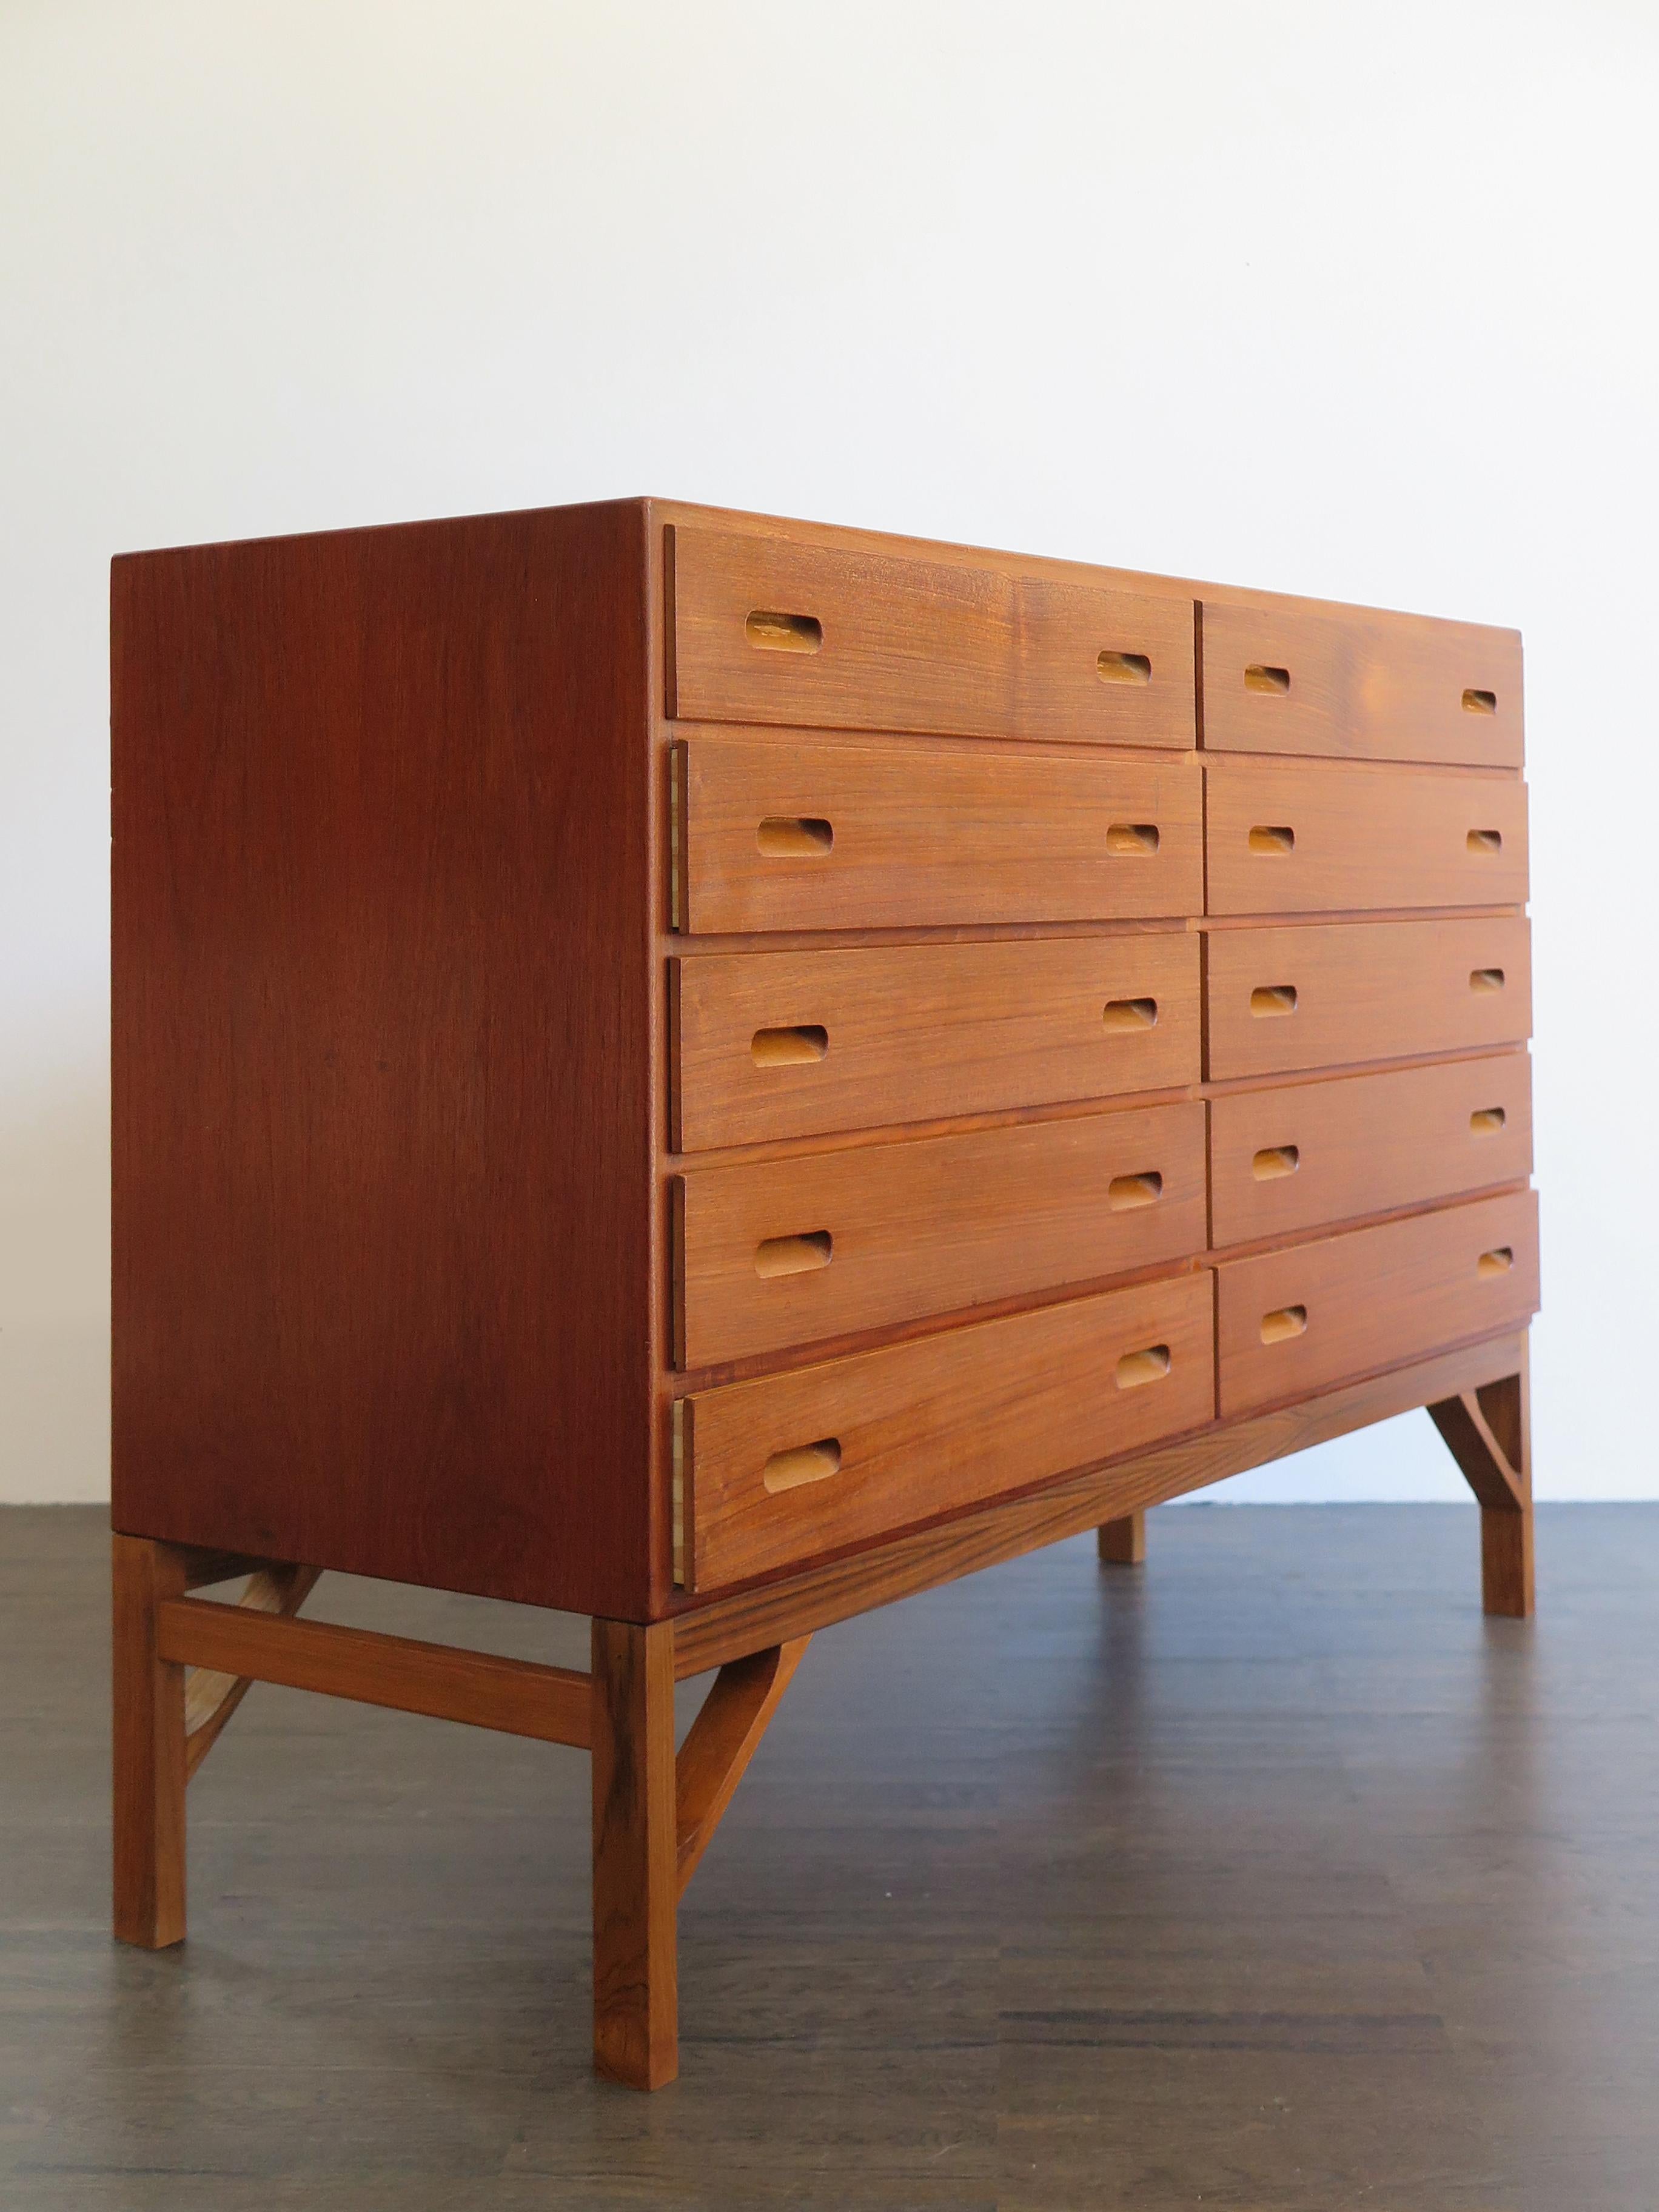 Scandinavian Mid-Century Modern design teak chest of drawers designed by Børge Mogensen and produced by C.M. Madsen from 1960s, Denmark 1960s.

Please note that the item is original of the period and this shows normal signs of age and use.